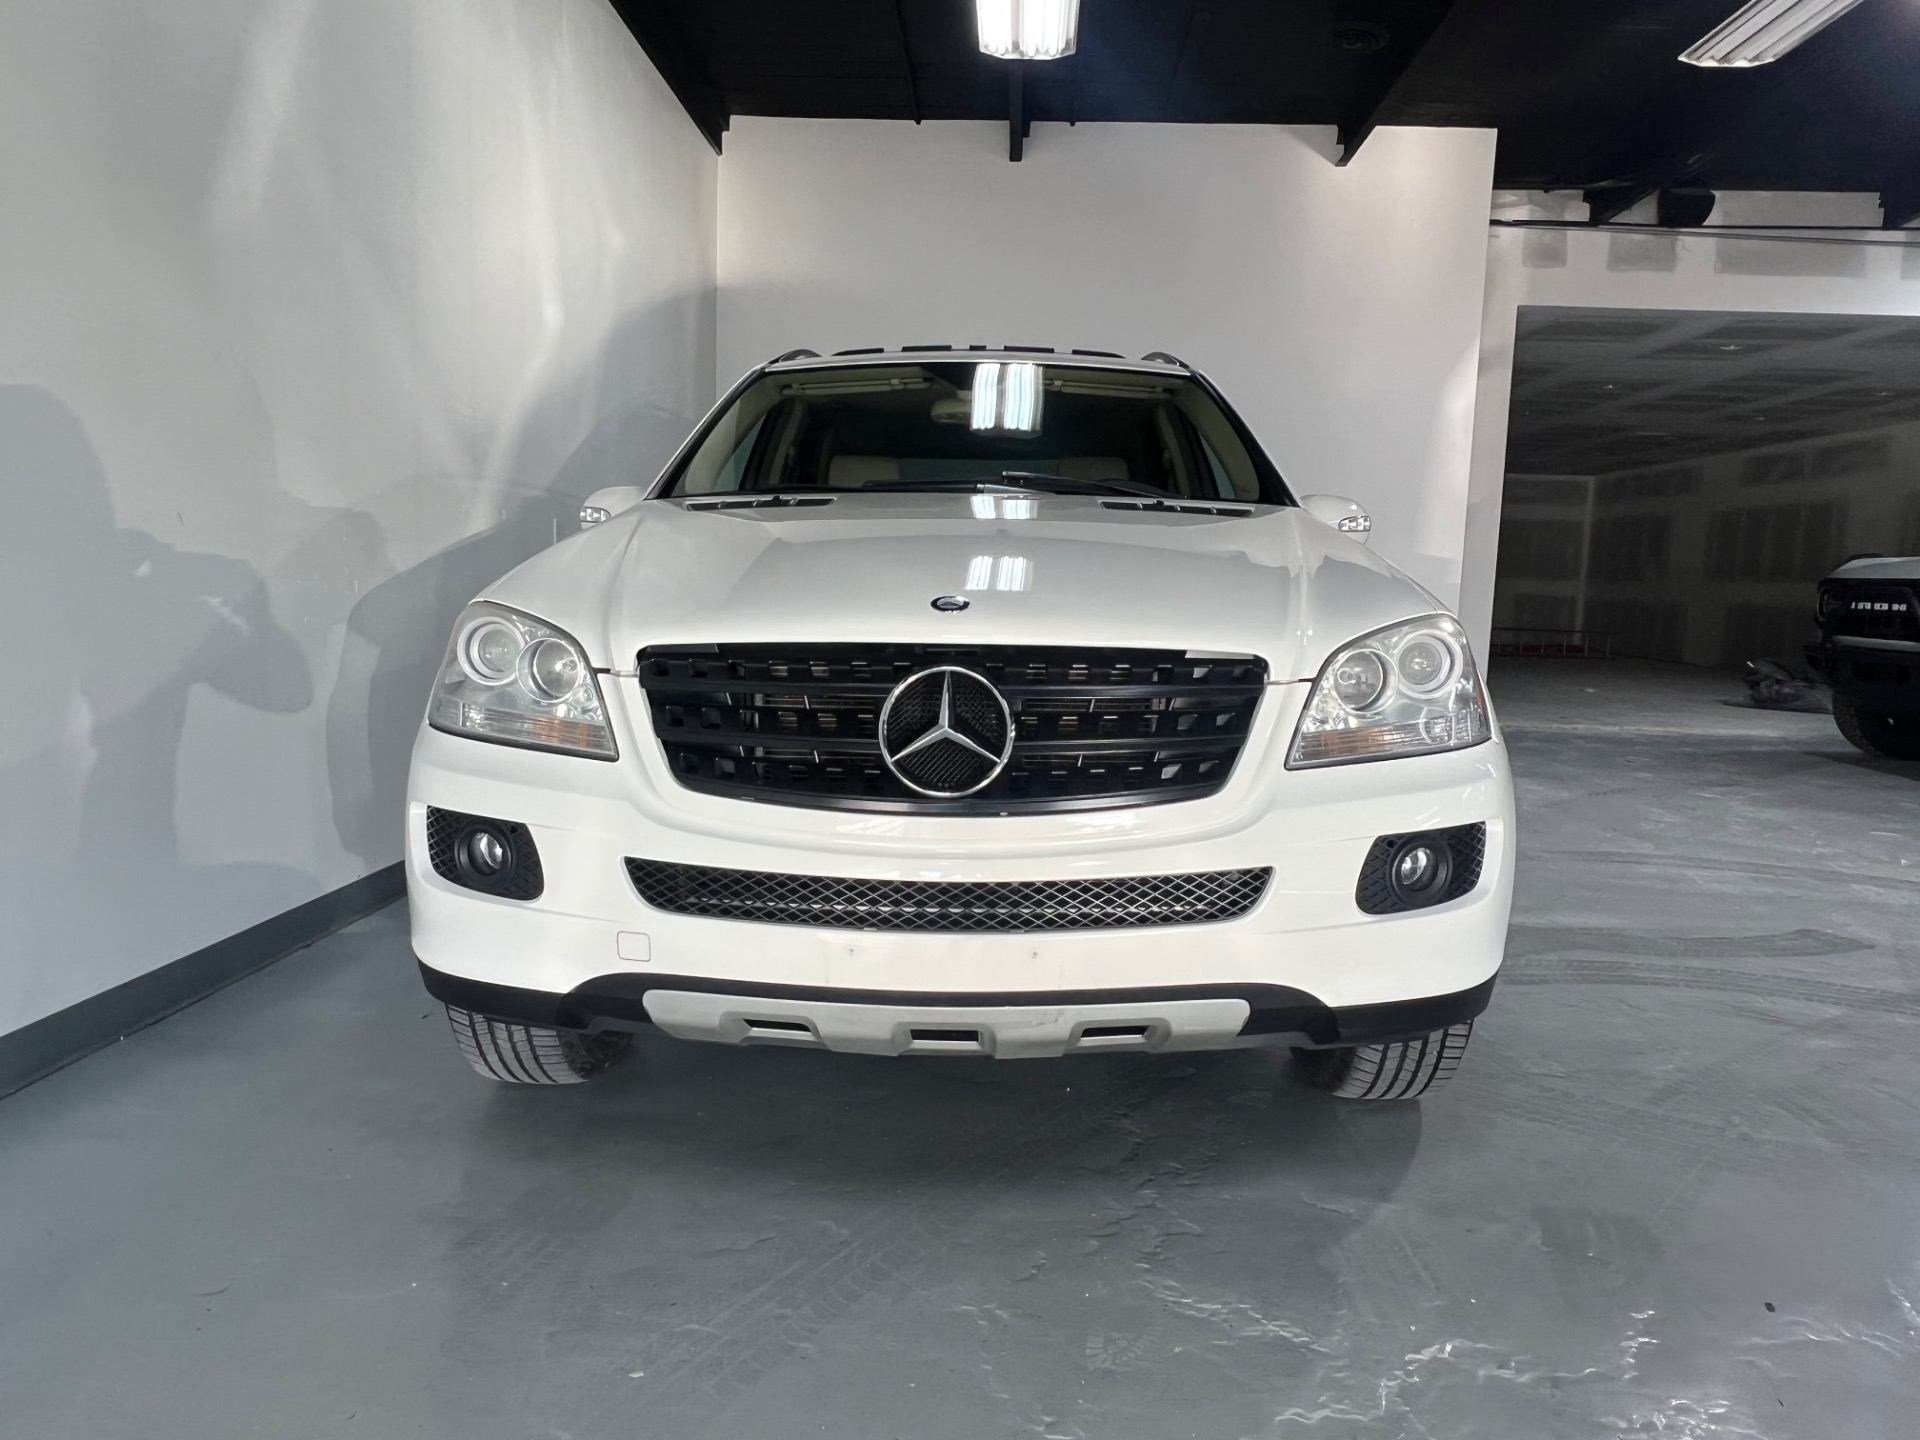 Used 2006 Alabaster White Mercedes-Benz M-Class ML350 4MATIC SUV